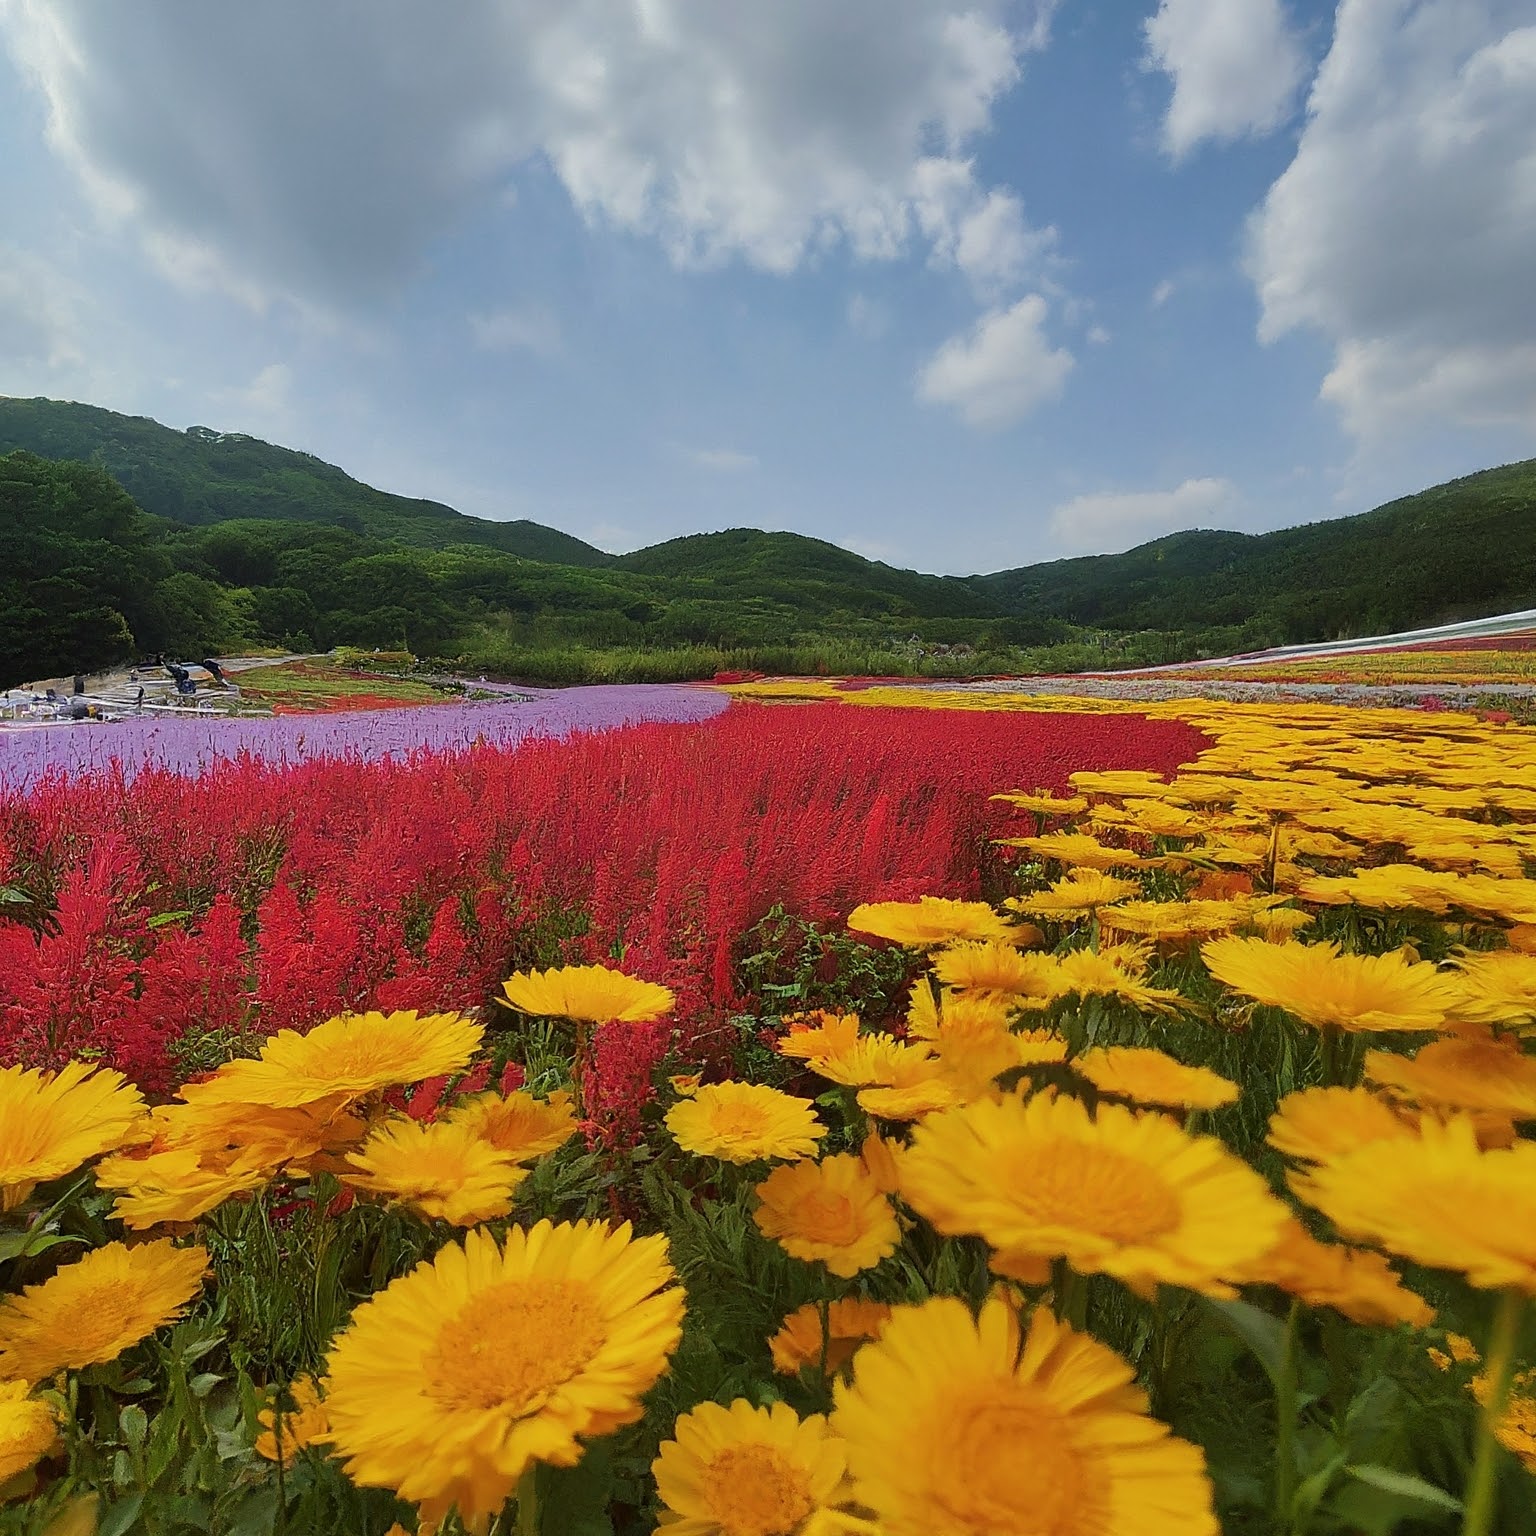 Vibrant flower field with colorful blooms in The Garden of Morning Calm, South Korea.